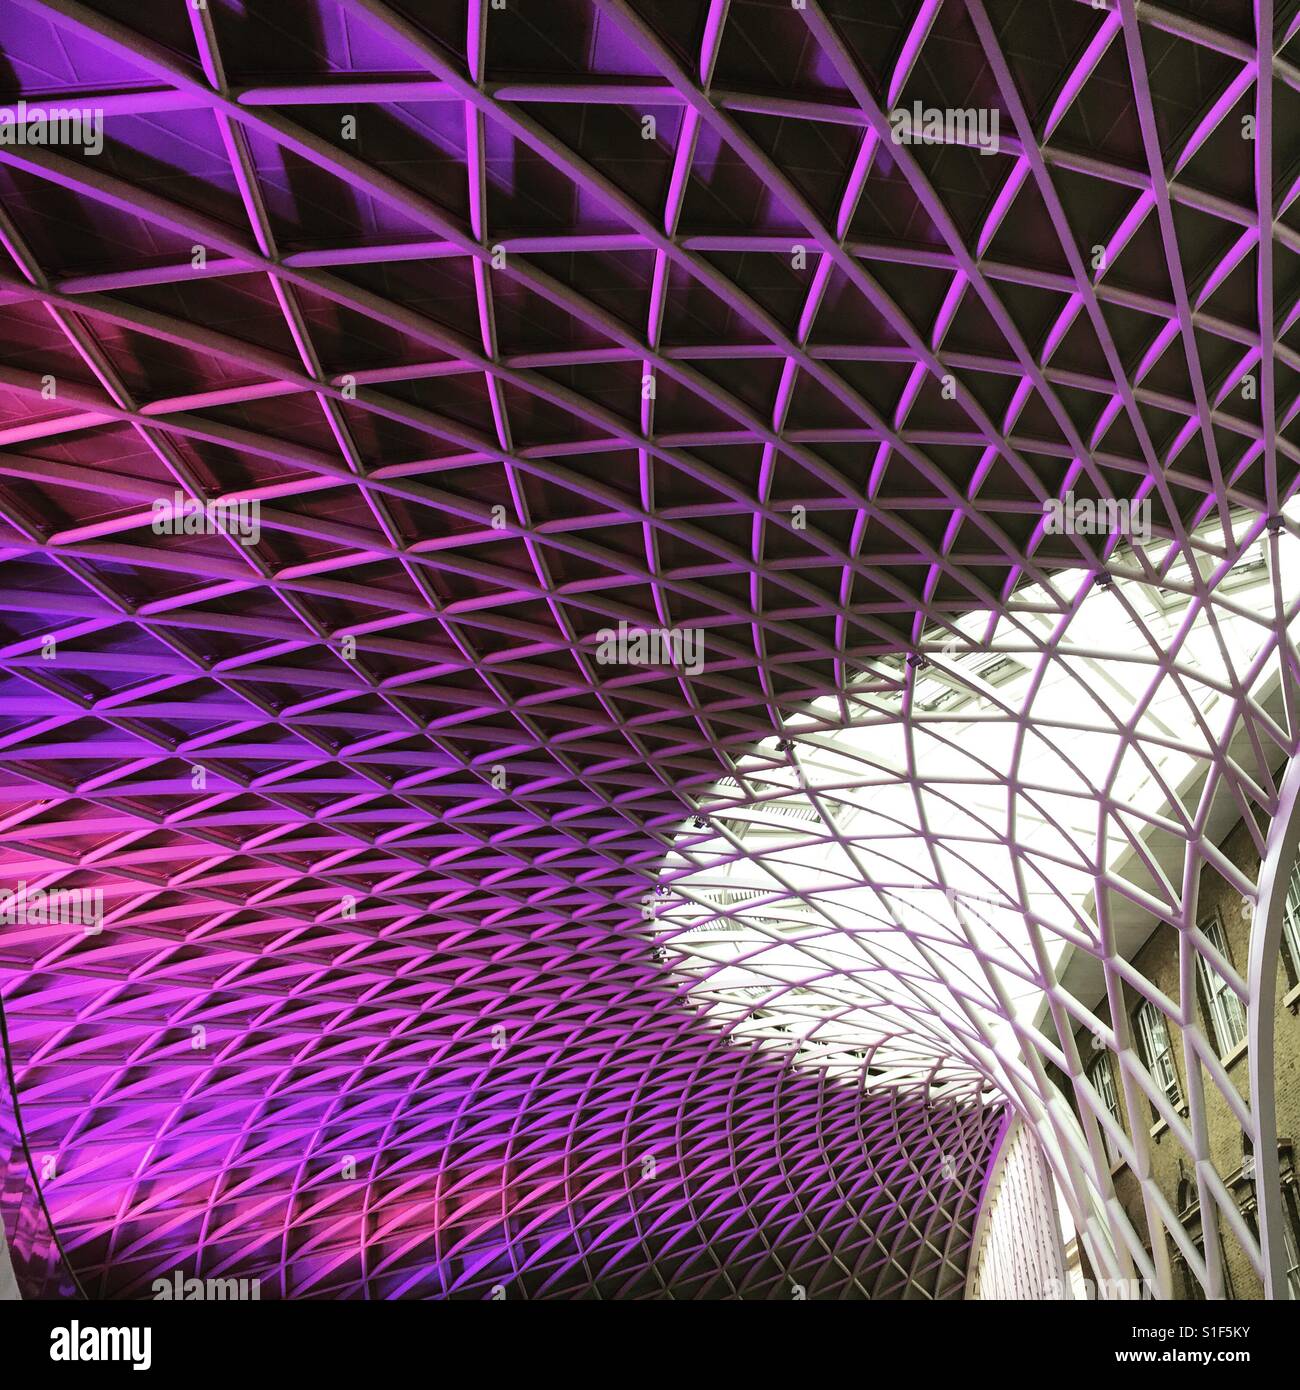 London kings cross astratto a soffitto Foto Stock